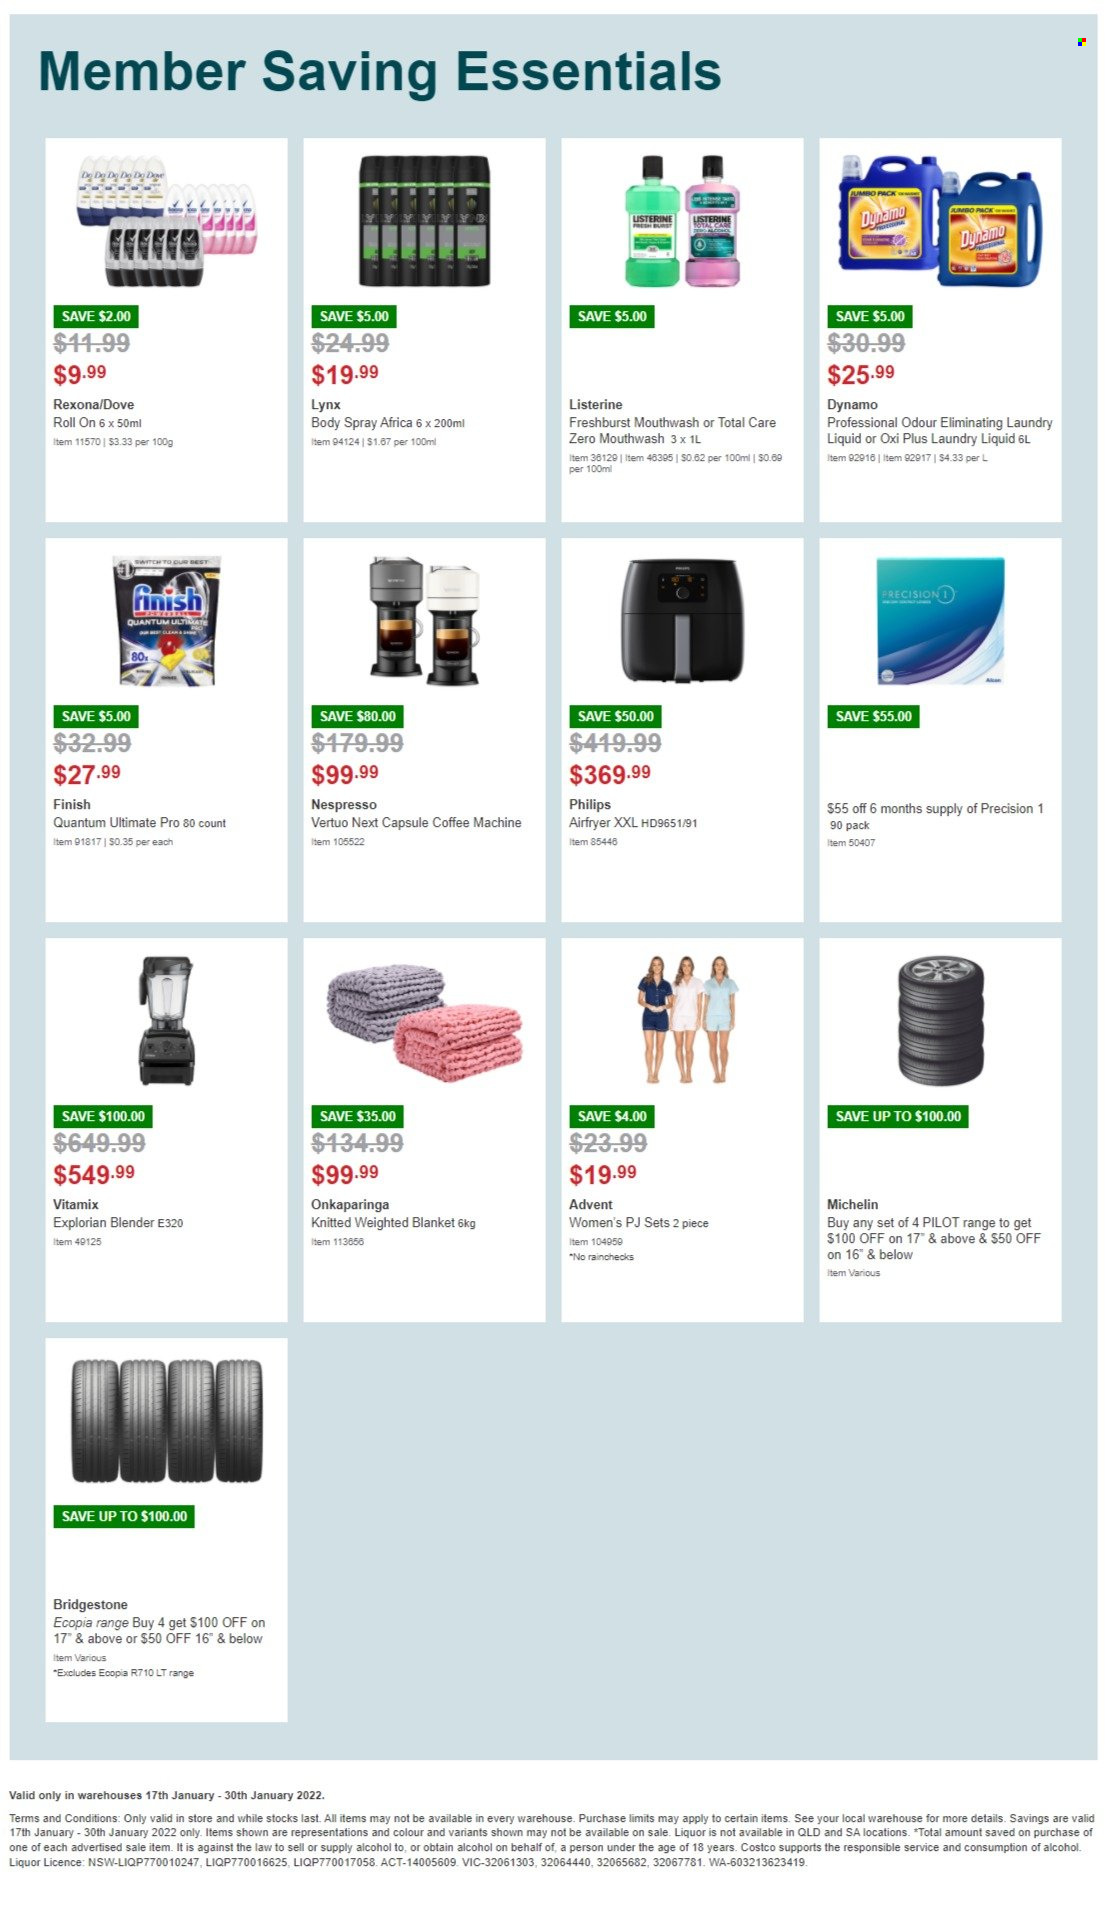 thumbnail - Costco Catalogue - 17 Jan 2022 - 30 Jan 2022 - Sales products - Philips, Nespresso, liquor, Dove, laundry detergent, Listerine, mouthwash, body spray, Rexona, roll-on, Pilot, blanket, coffee machine, capsule coffee machine, blender, air fryer, weighted blanket, Bridgestone, Michelin. Page 4.